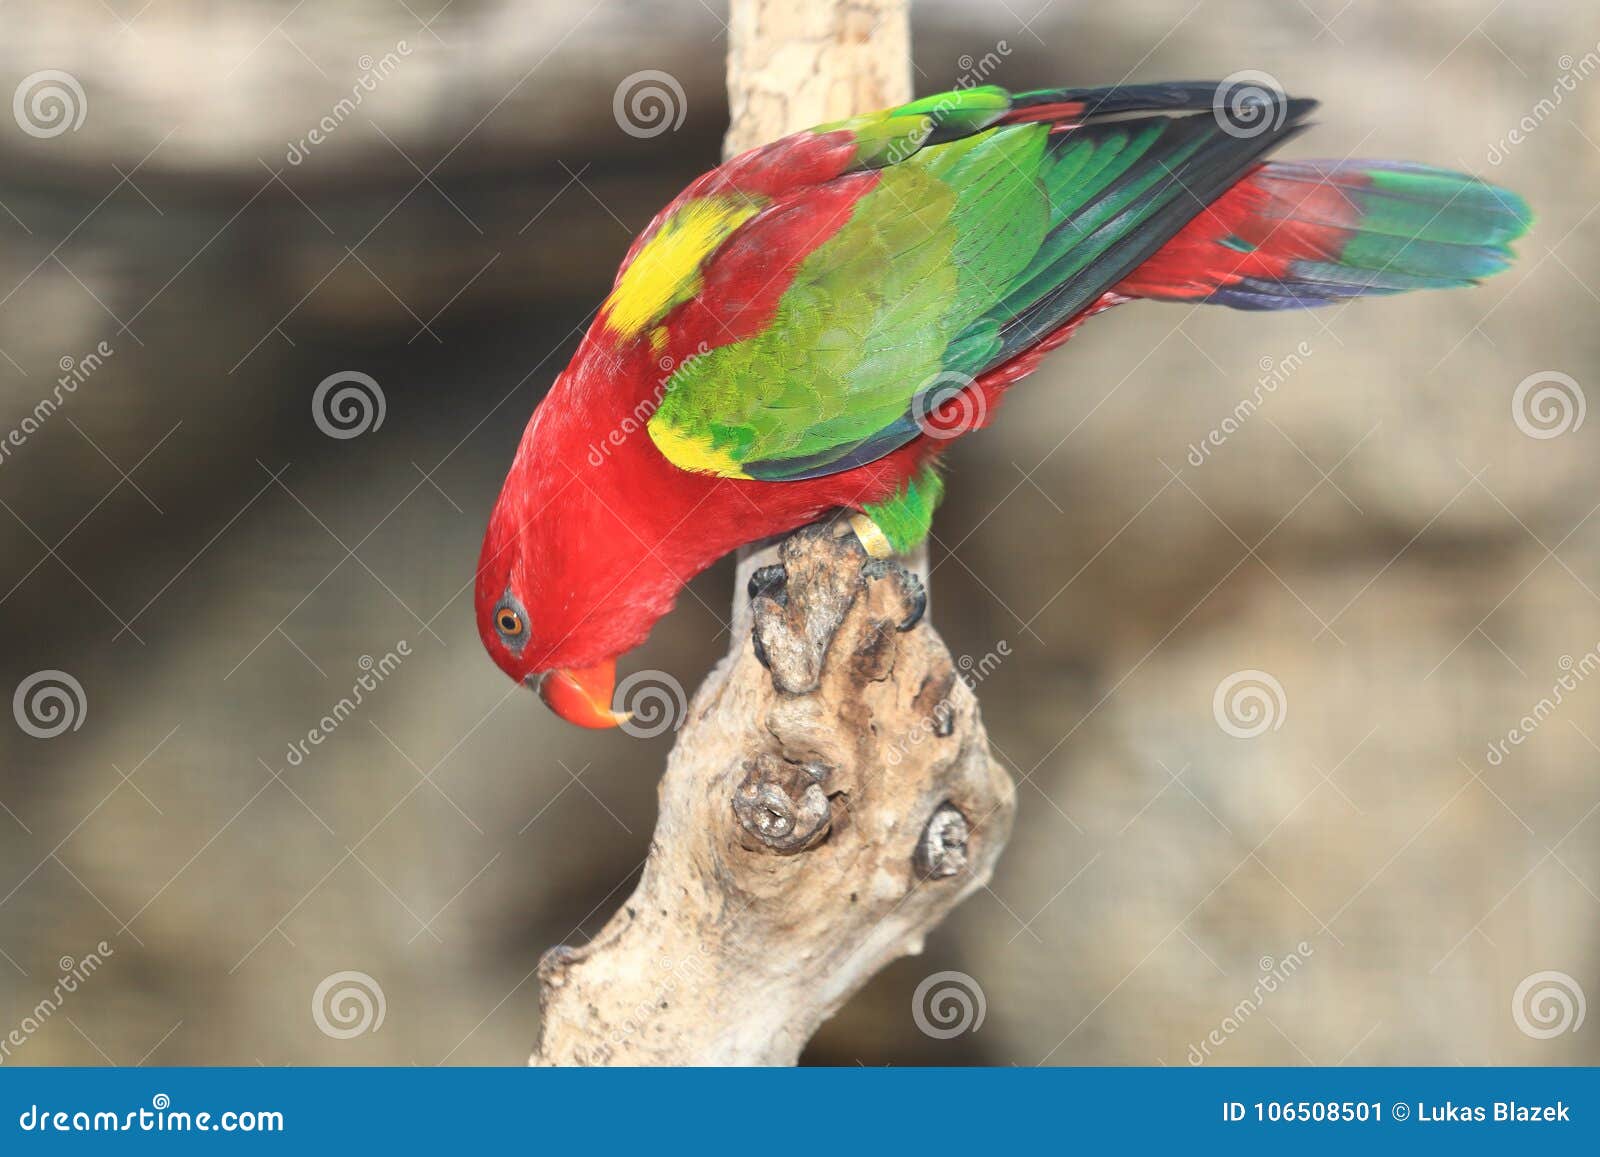 chattering lory